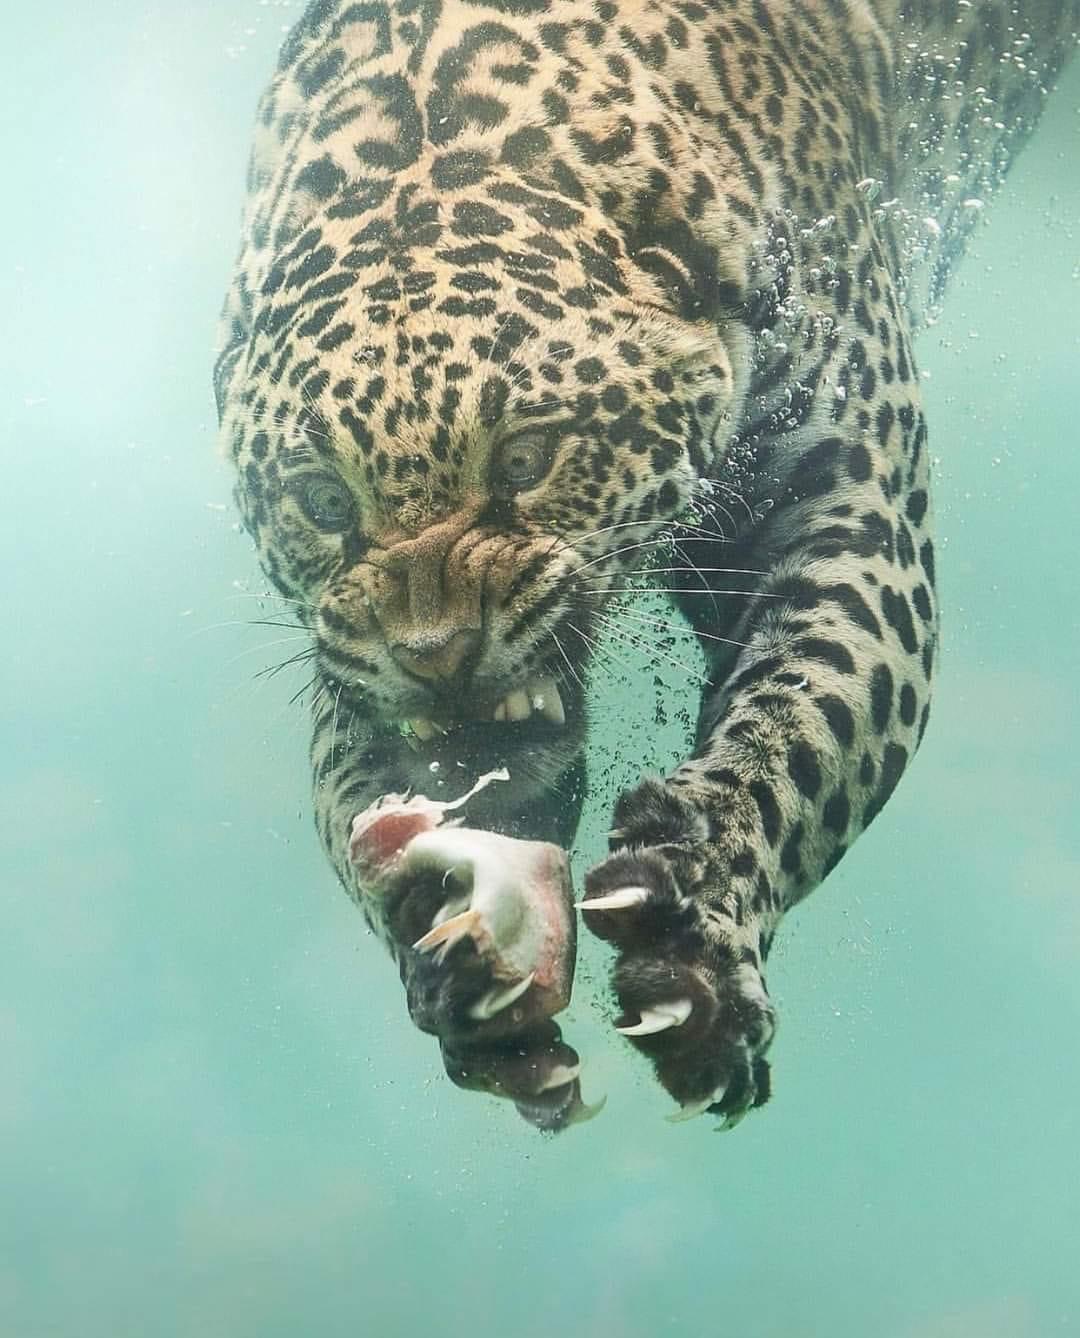 High Quality Jaguar dives to catch food Blank Meme Template